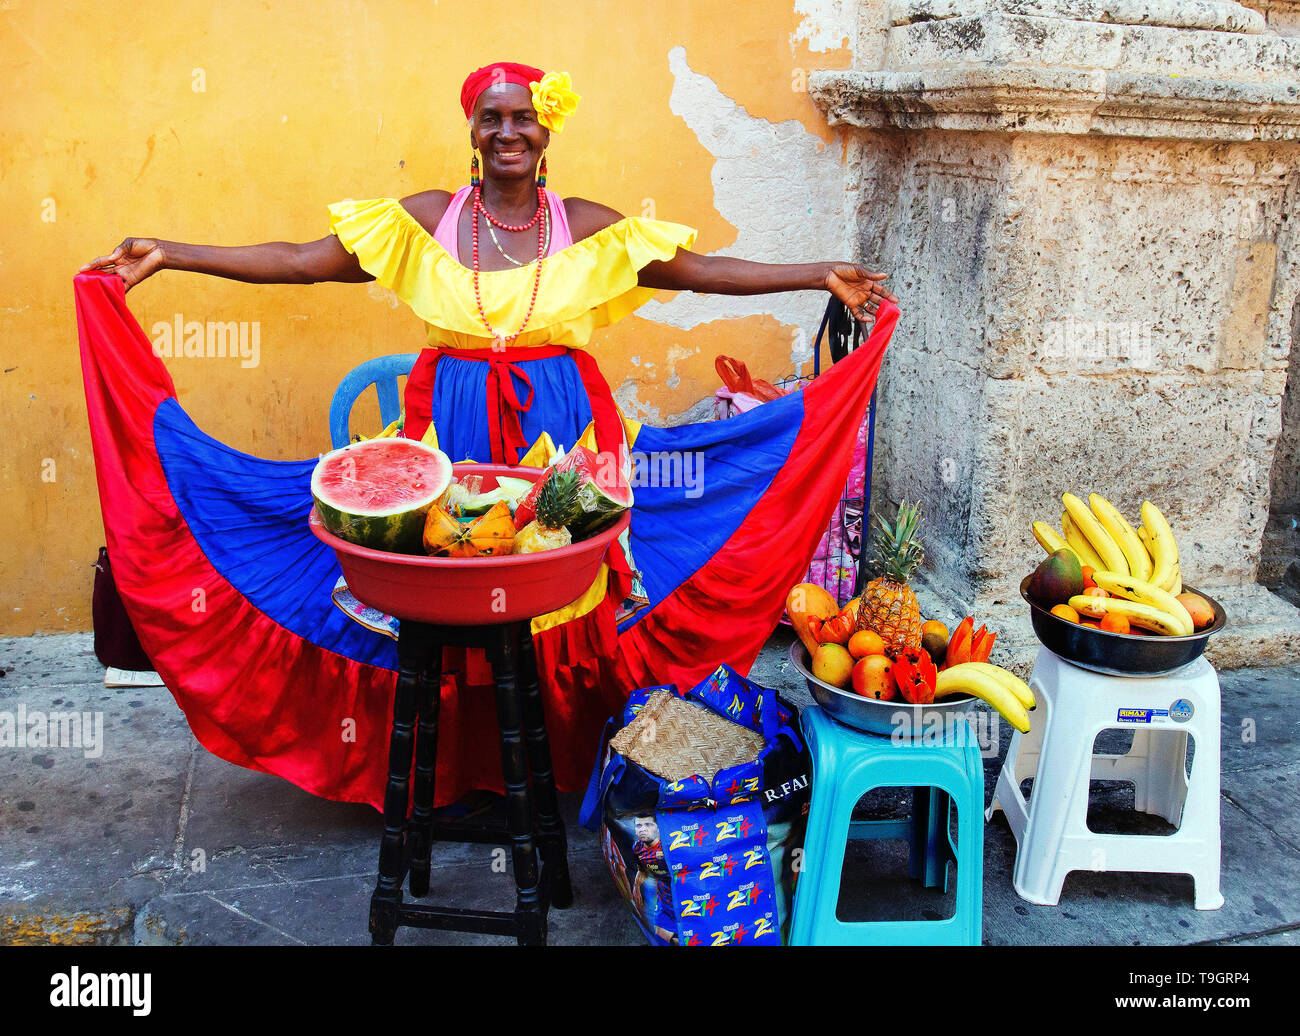 friendly smiling fruit vendor in a colourful dress selling fruit on the street Cartagena, Colombia Stock Photo